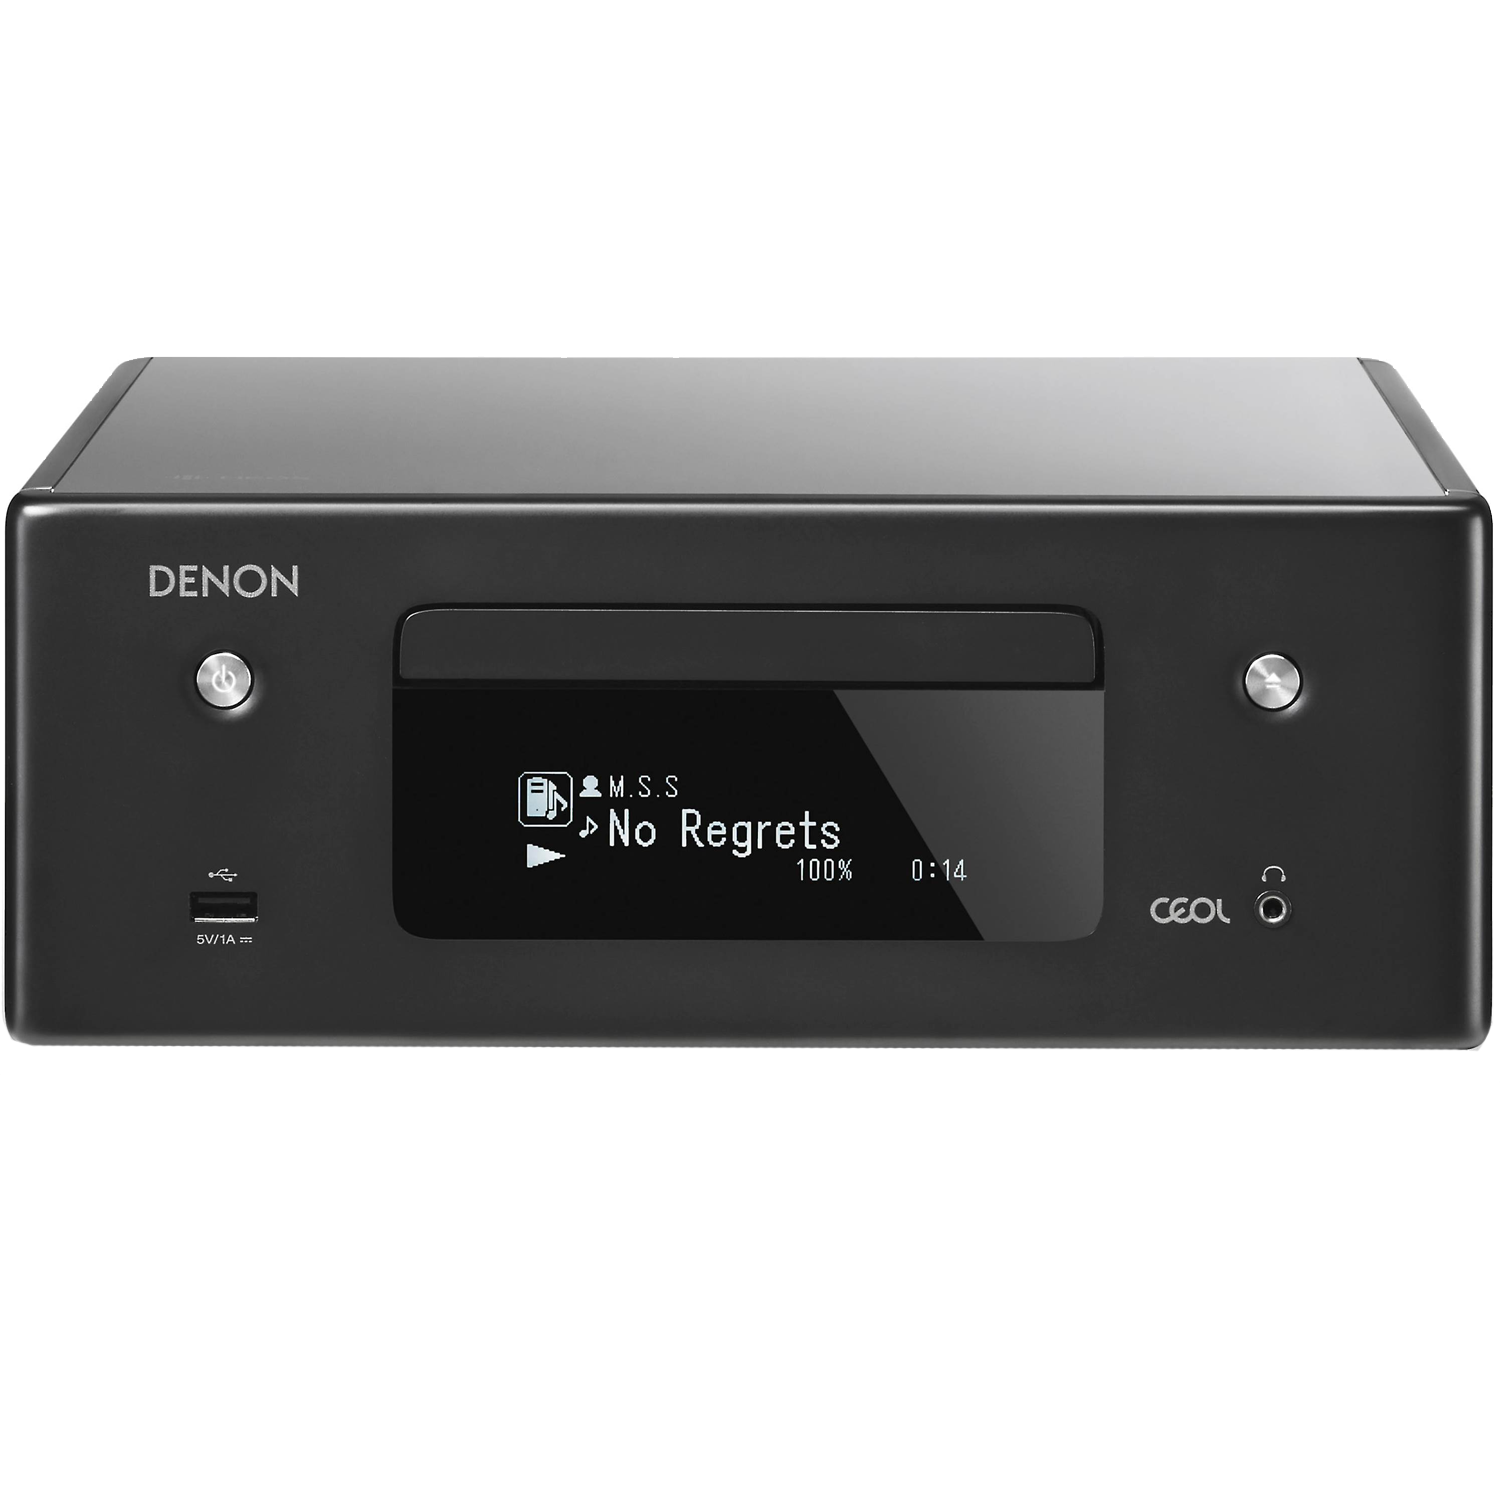 DENON NEW CEOL RCD-N10 Compact Stereo Receiver w/ CD, BT, AirPlay, and HEOS